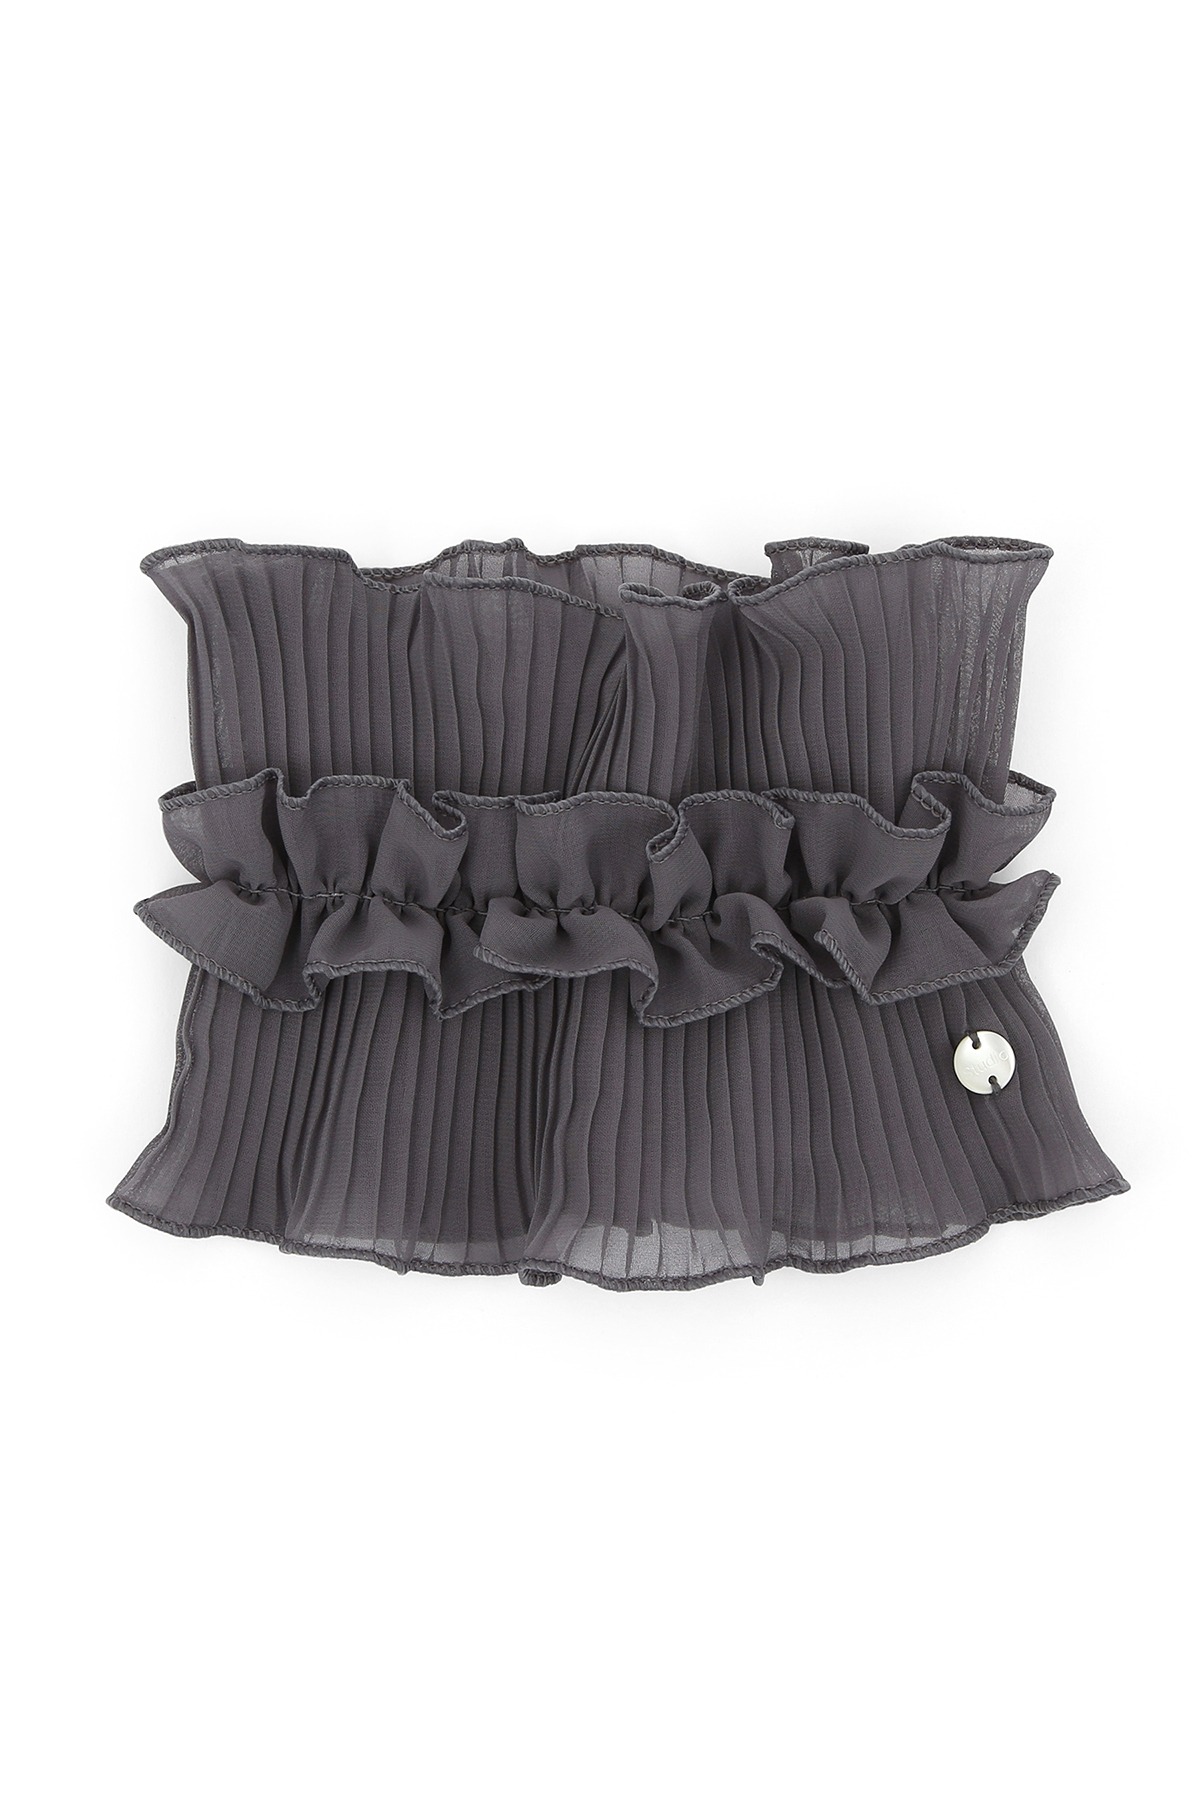 NECK TUBE / DOUBLE PLEATED LACE / GREY